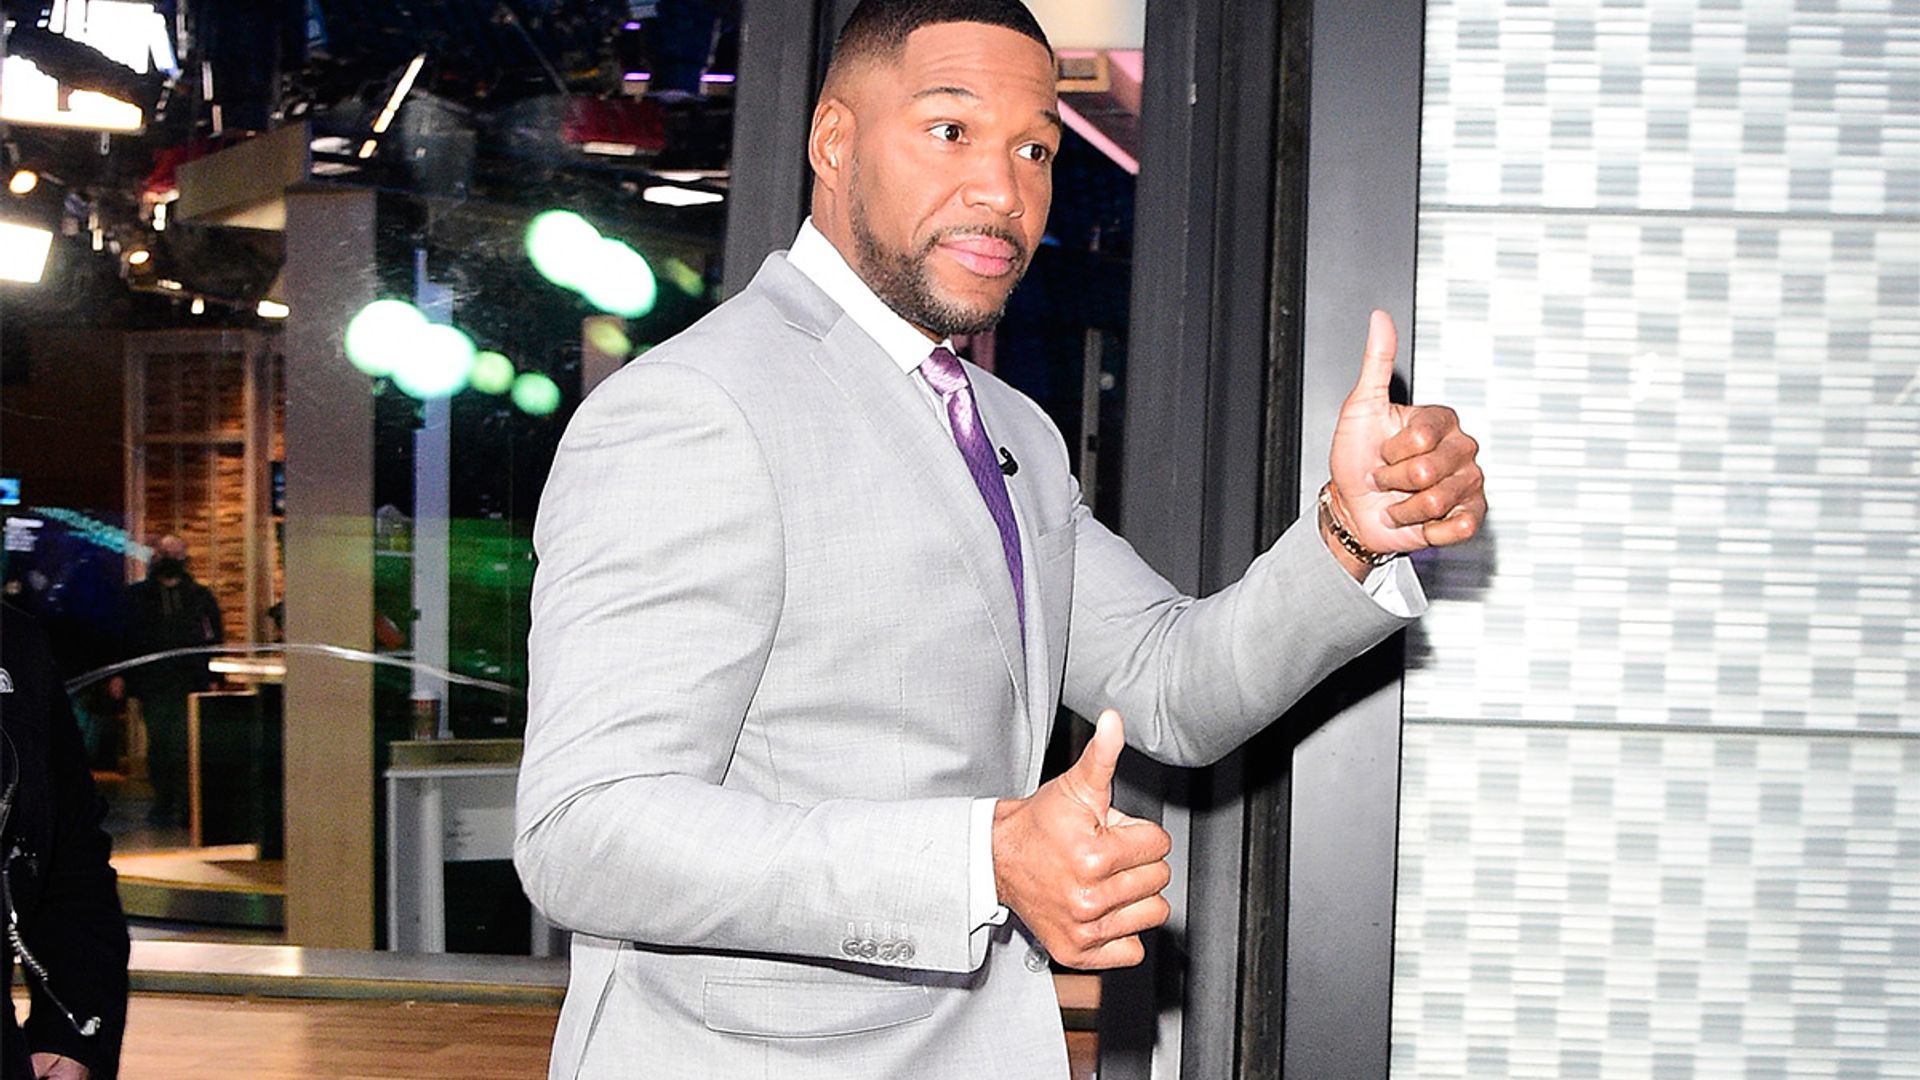 gma michael strahan confronts boss